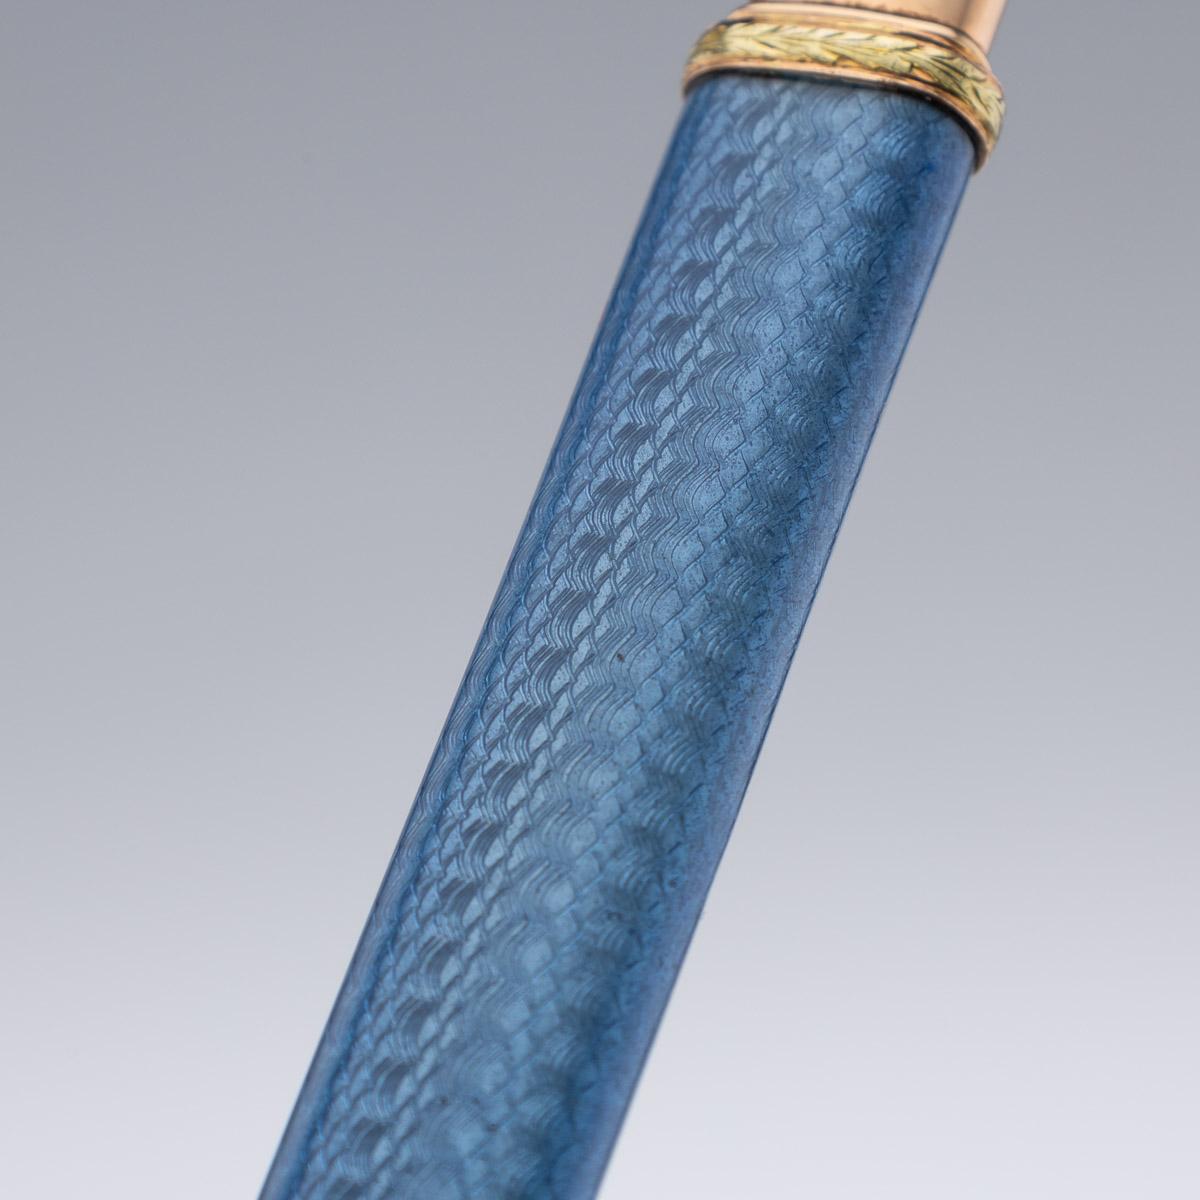 20th Century Russian Faberge Two-Colour Gold-Mounted Enamel Pencil, Adler C.1910 2